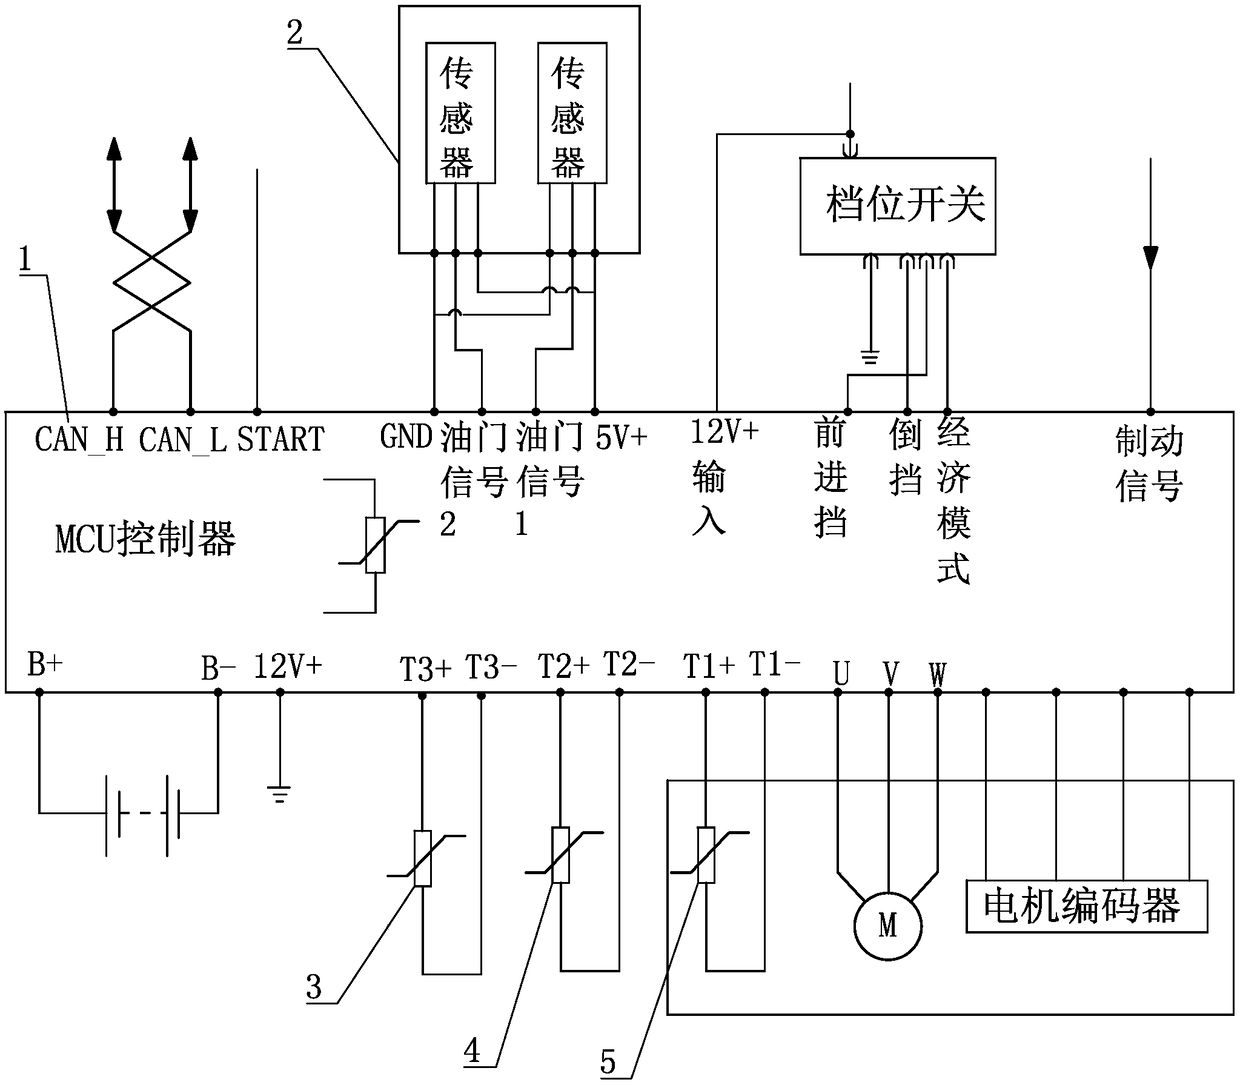 Over-temperature protection system and over-temperature protection method for driving motor and controller of electric vehicle